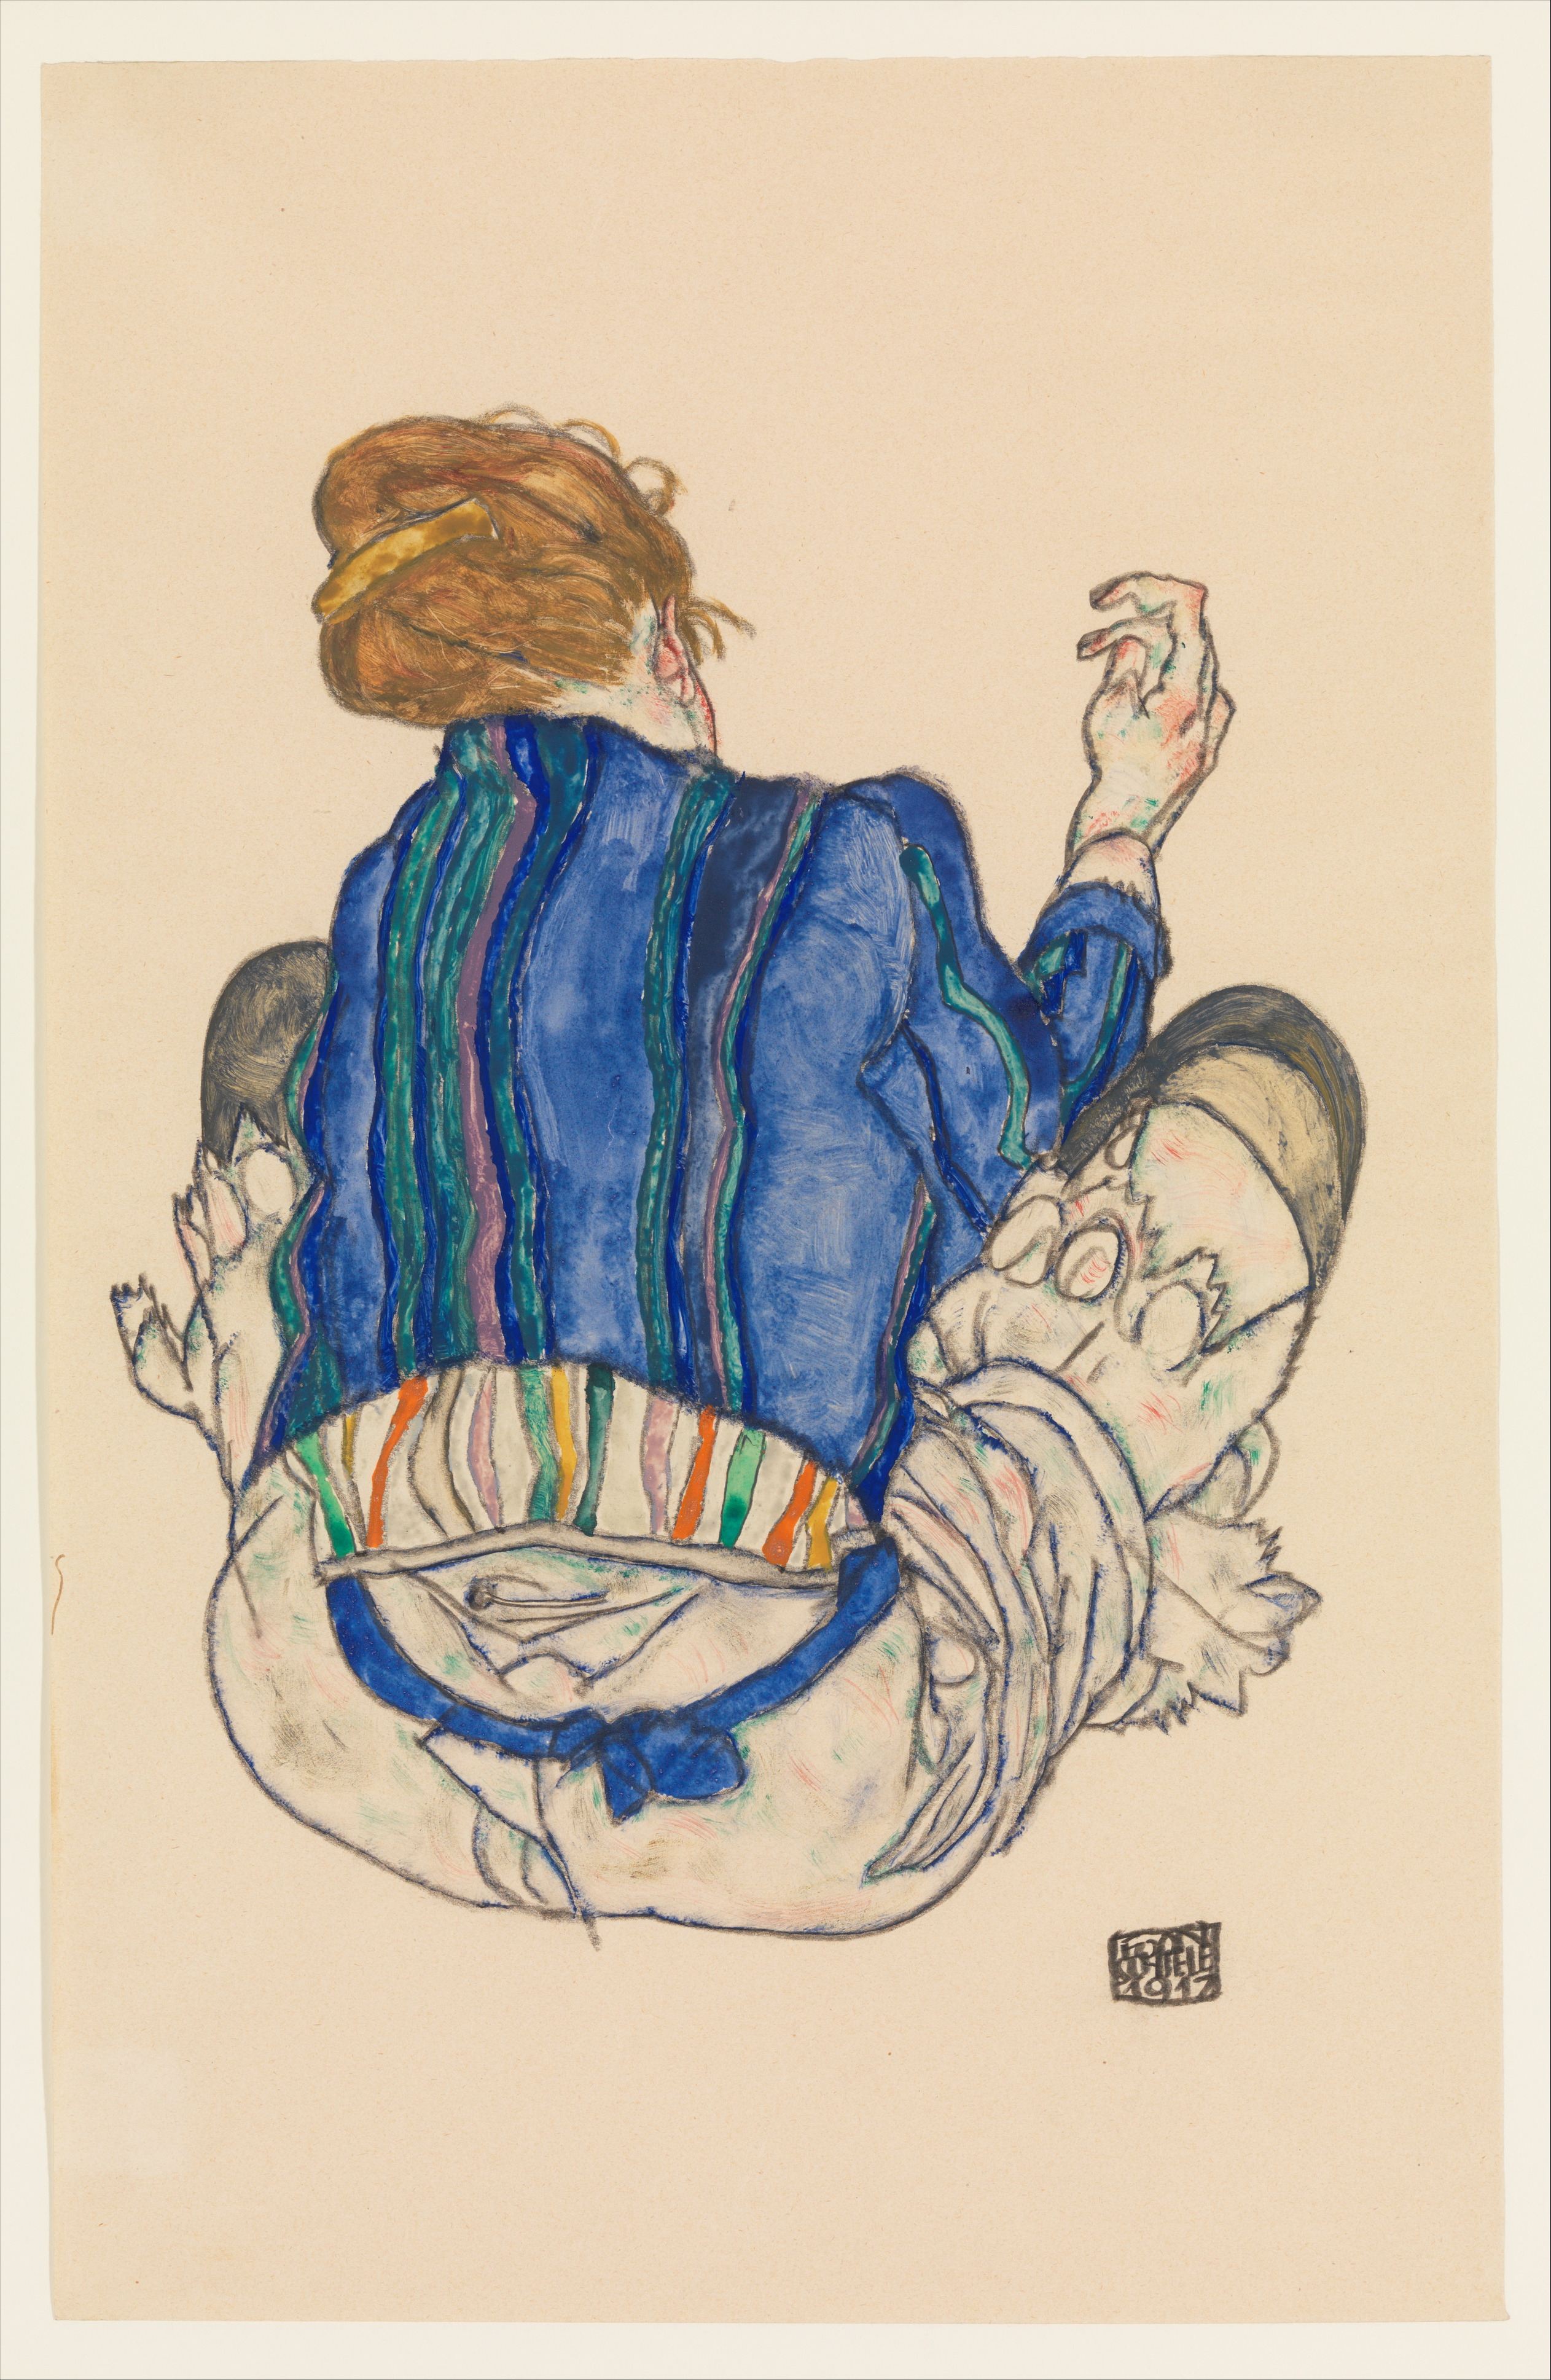 Seated Woman, Back View by Egon Schiele - 1917 - 46.4 x 29.8 cm 